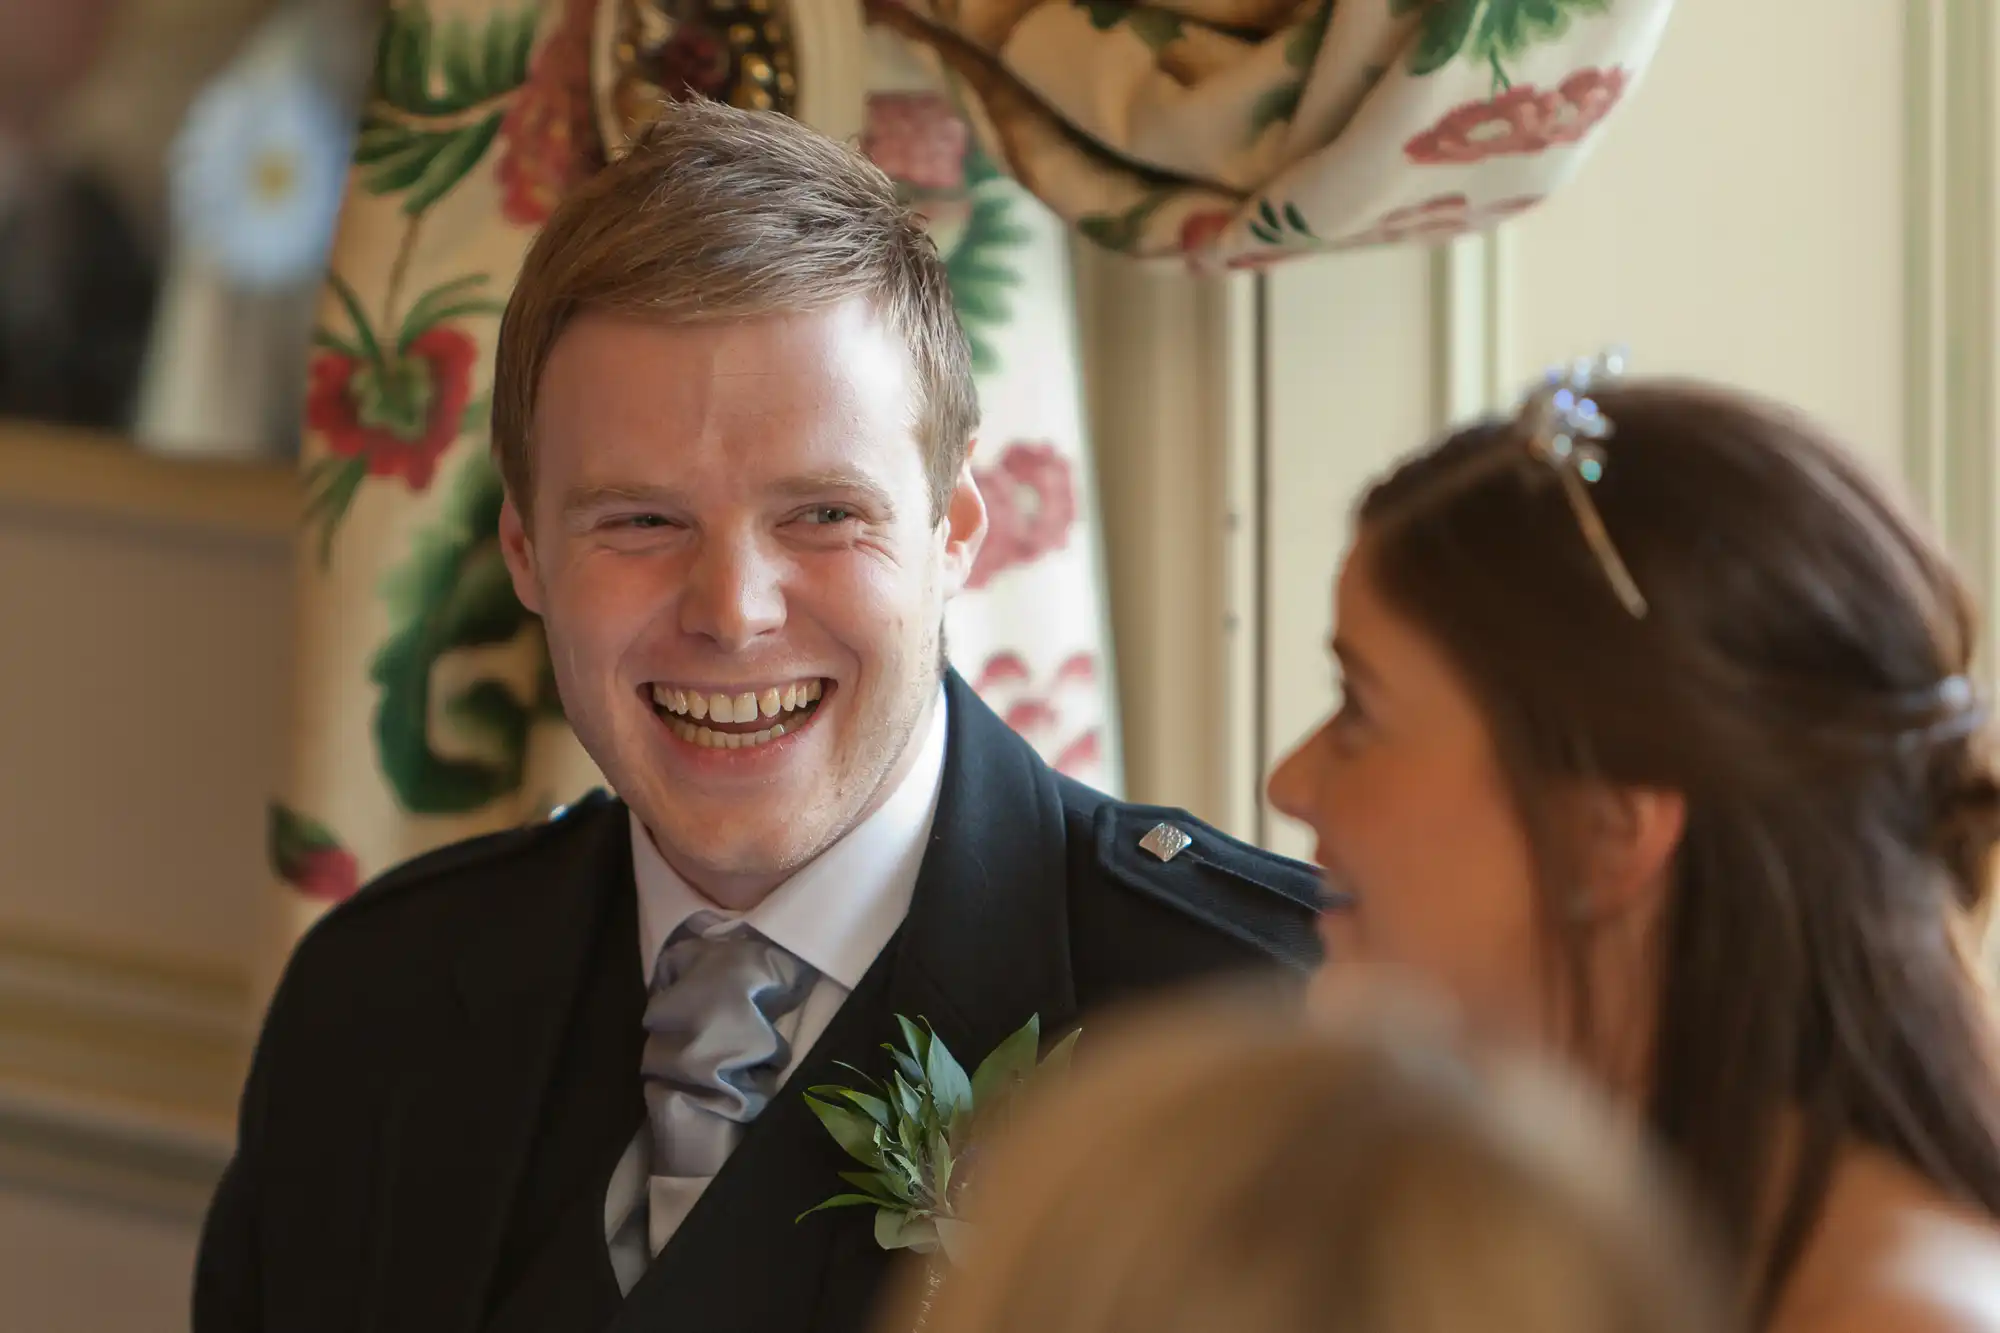 A man in a suit and tie, smiling broadly at a woman with a tiara, visible in partial profile, in a room with floral wallpaper.